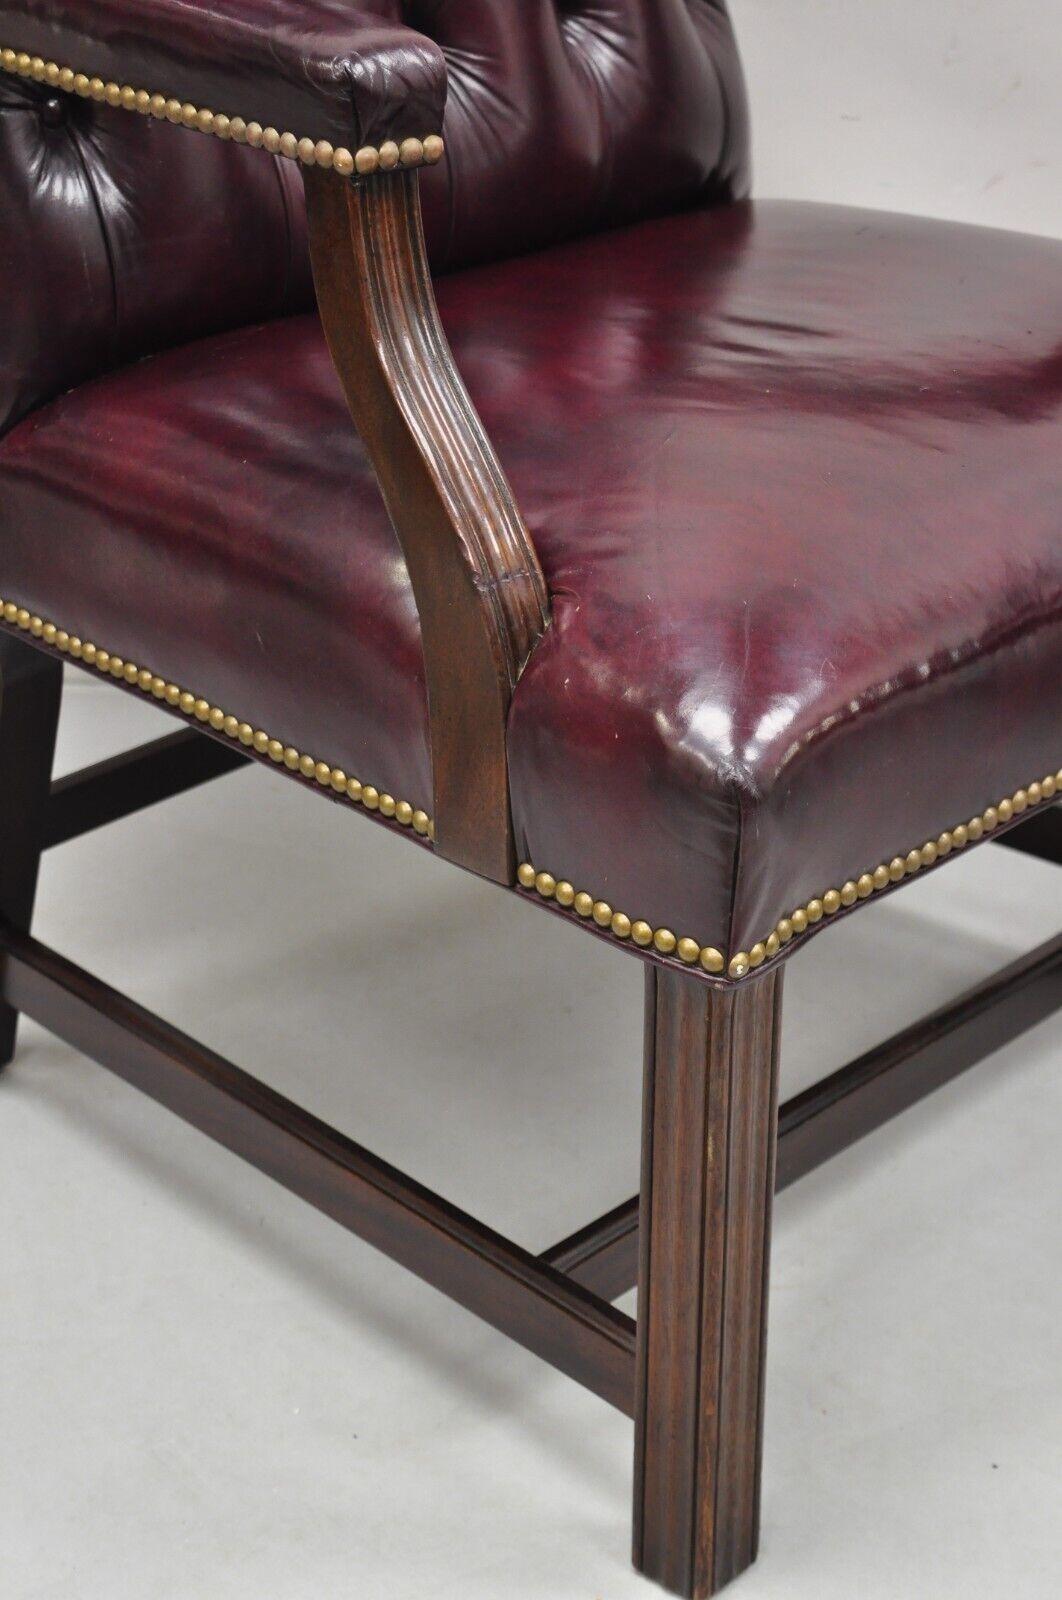 Hancock & Moore Oxblood Burgundy Leather Chesterfield Tufted Office Chairs Pair For Sale 3